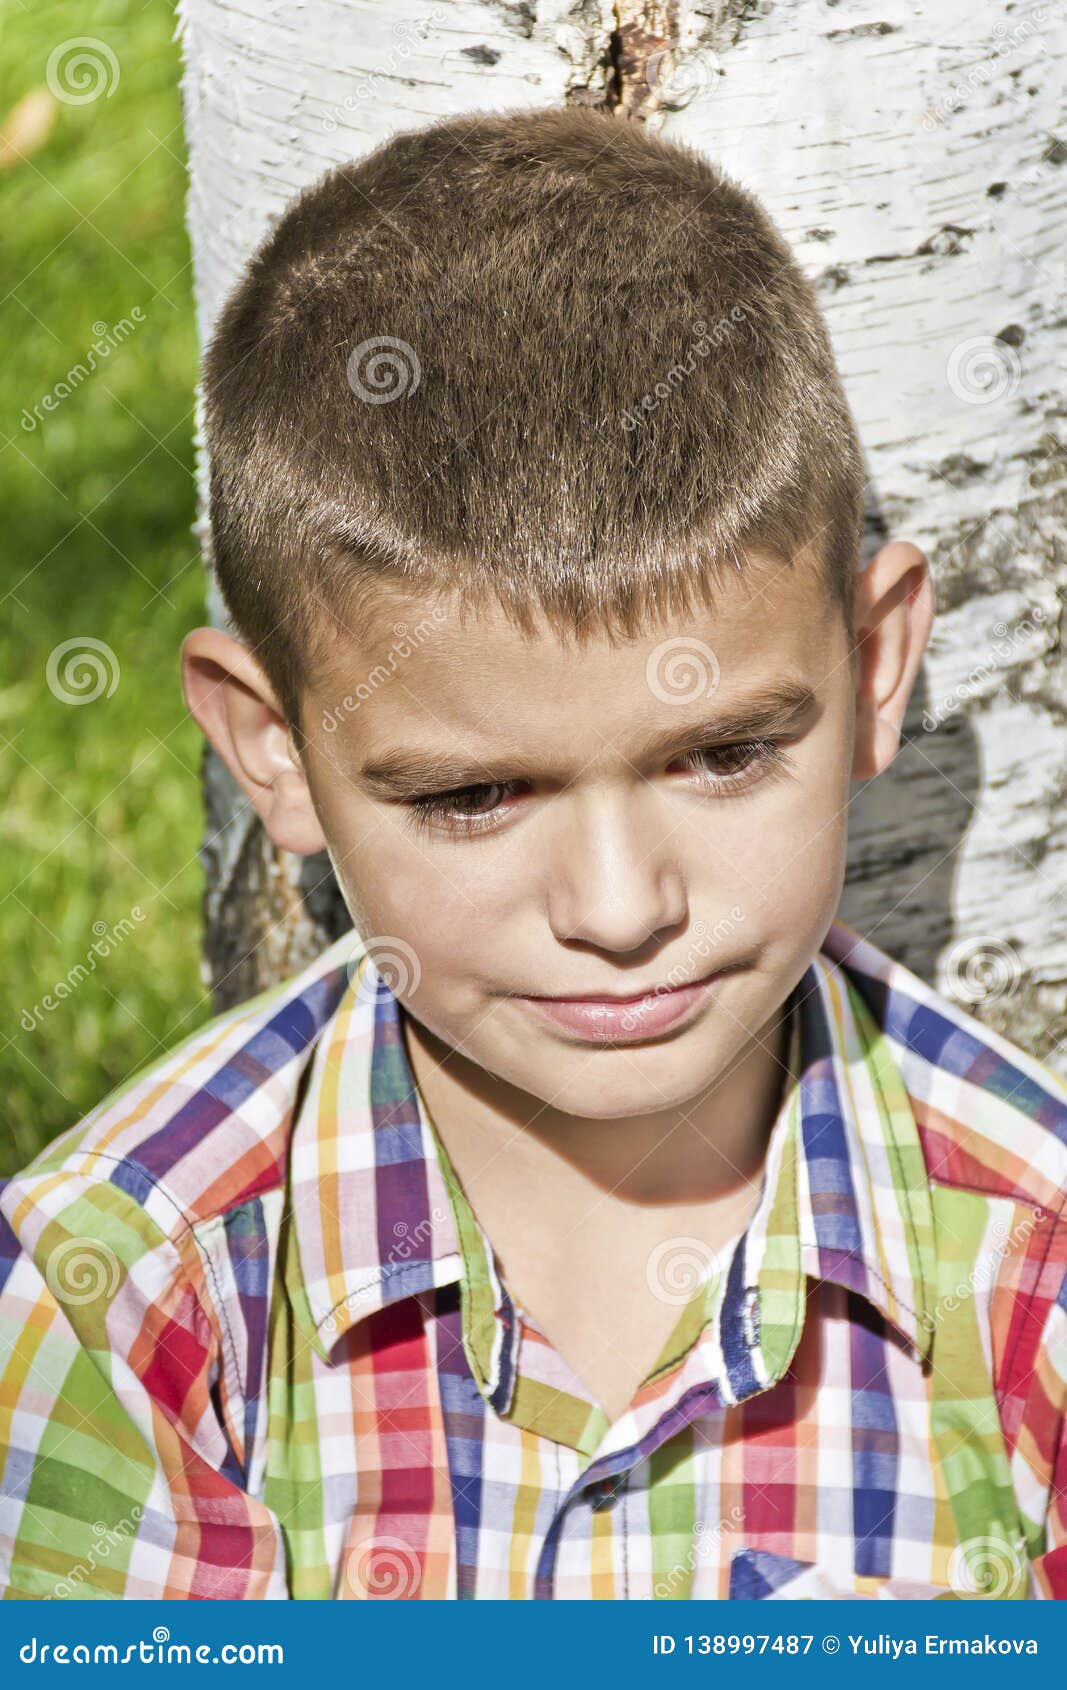 Cute Brunette Boy Eleven Years Old Stock Image - Image of casual ...